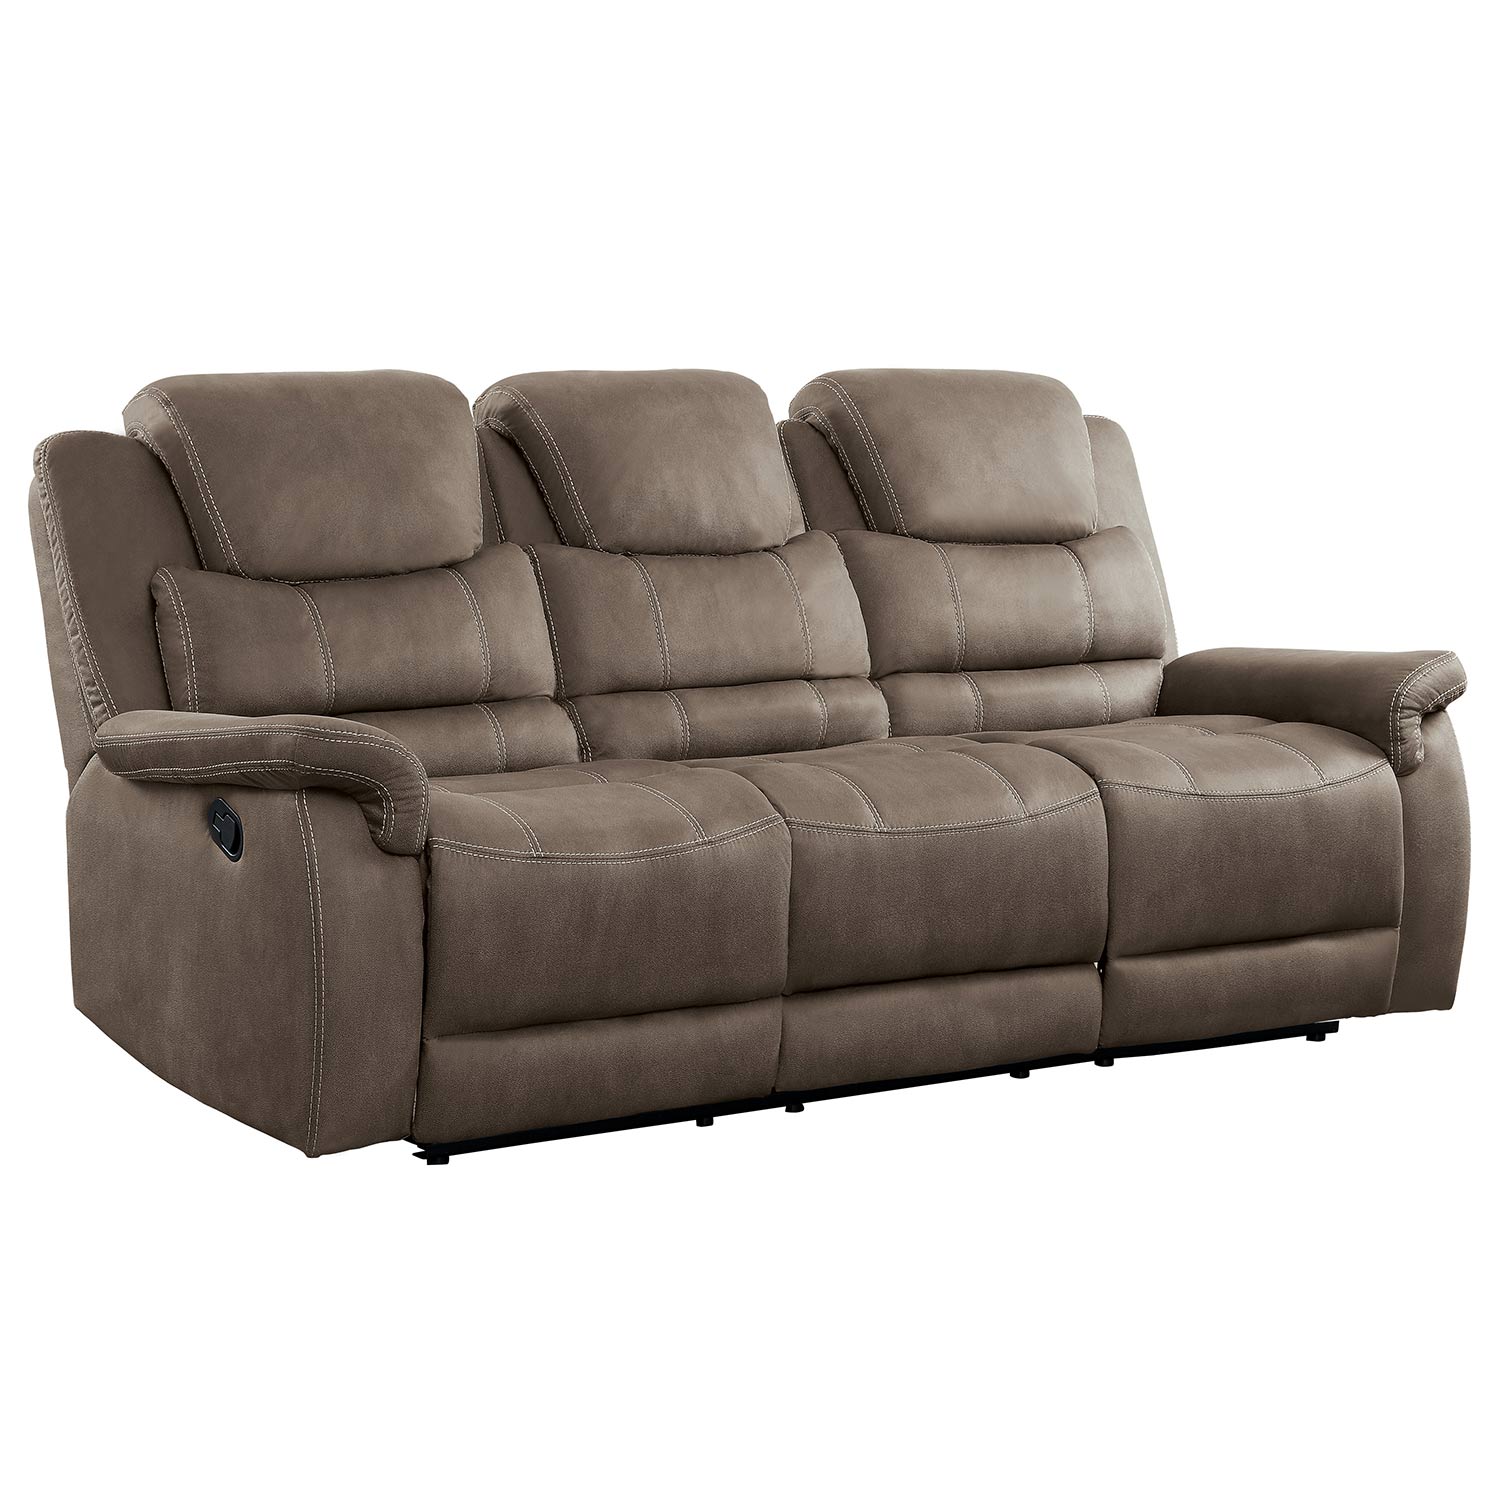 Homelegance Shola Double Reclining Sofa with Drop-Down Cup holders and Receptacles - Brown